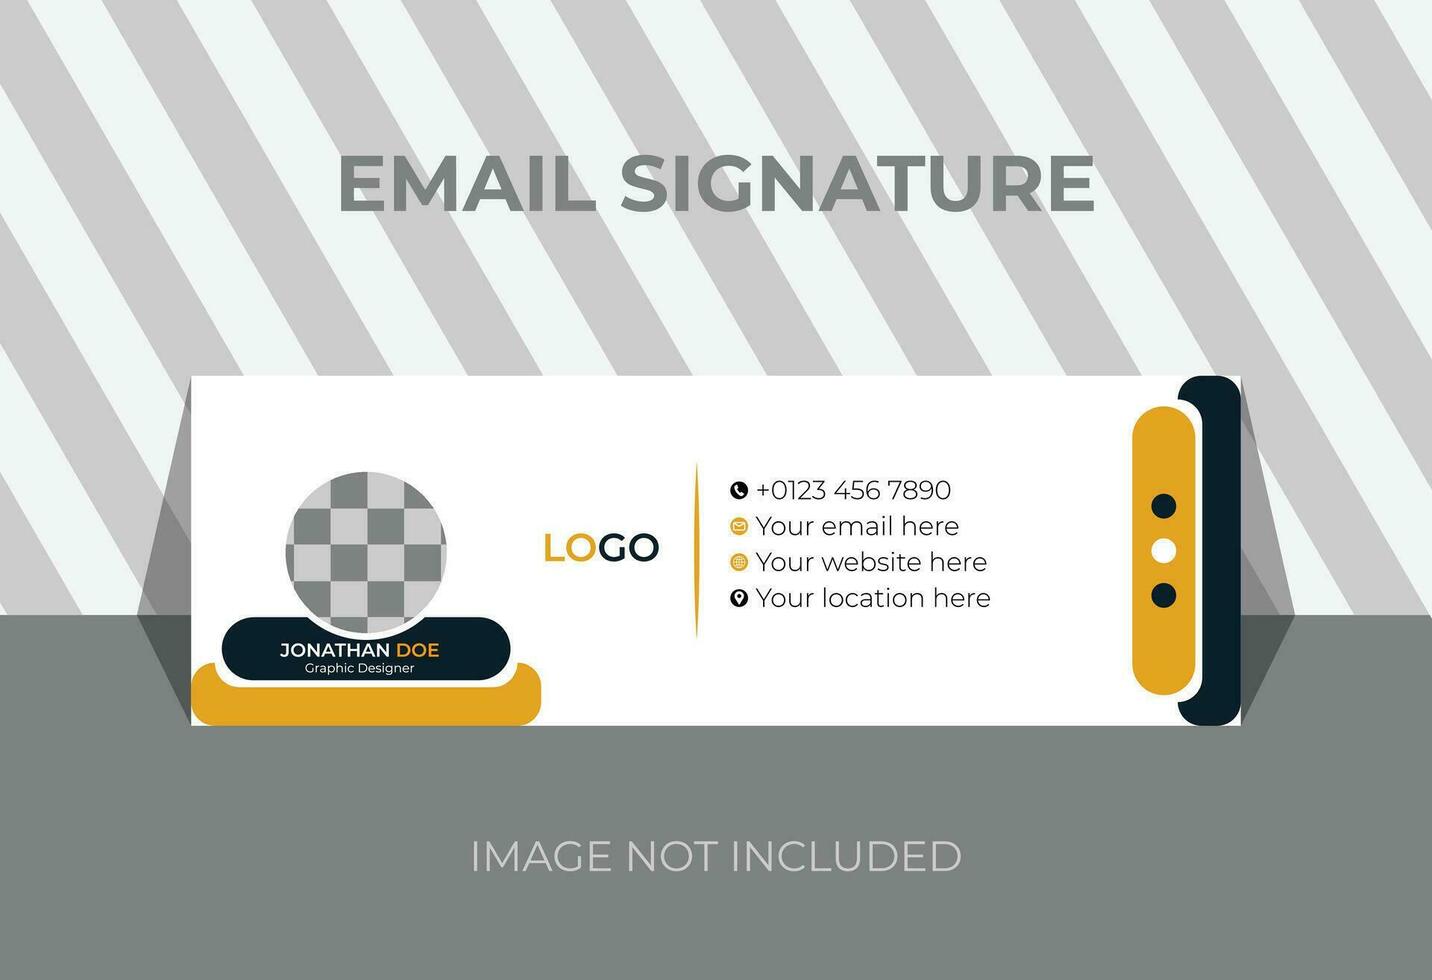 Corporate, Modern and Professional Email Signature. Creative Multipurpose business email signatures vector